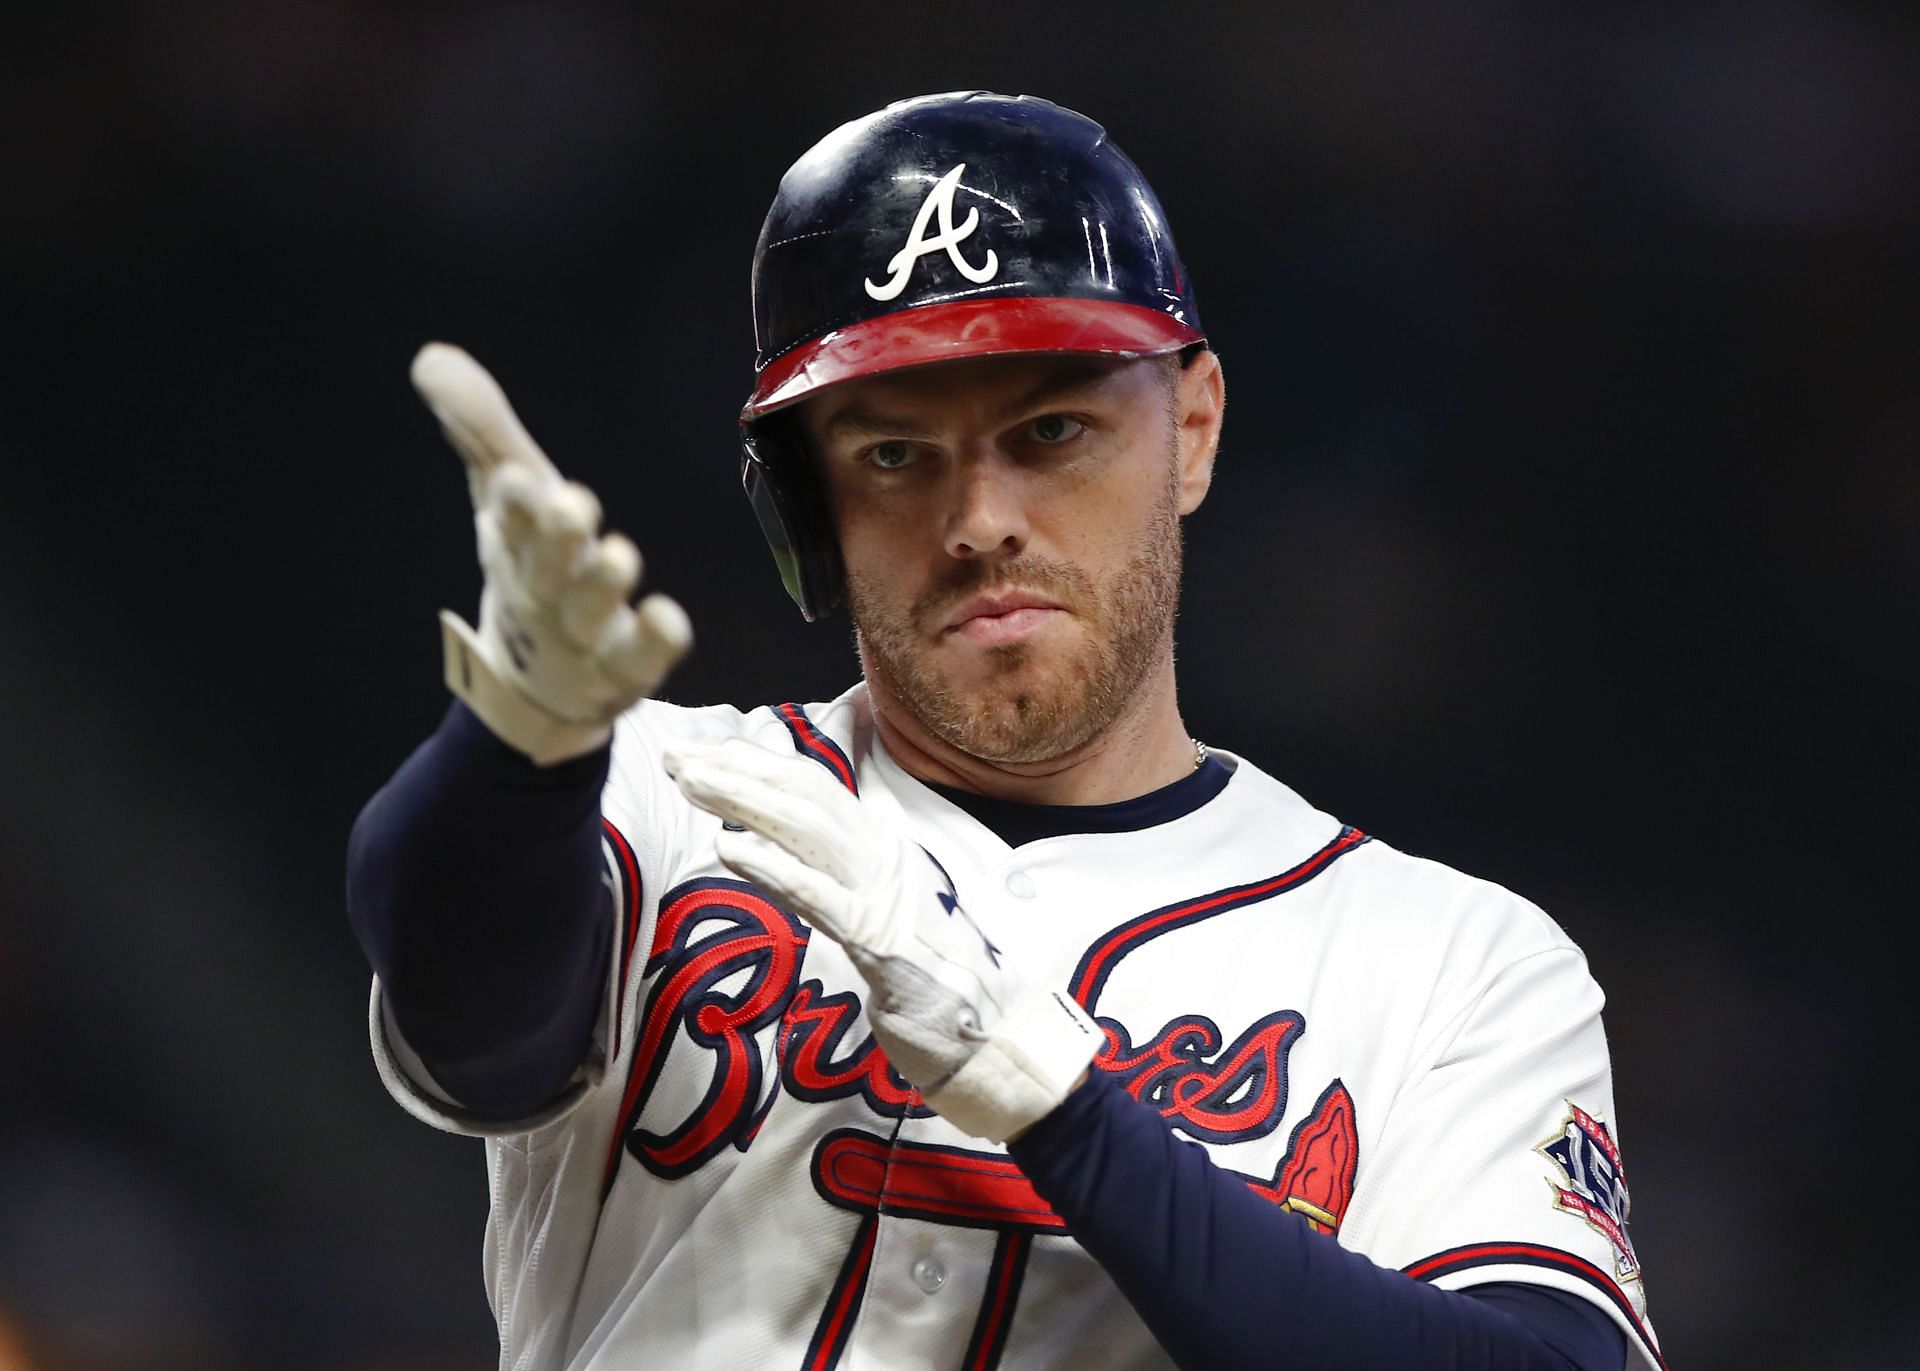 When Freddie Freeman was resolute on signing off his major league